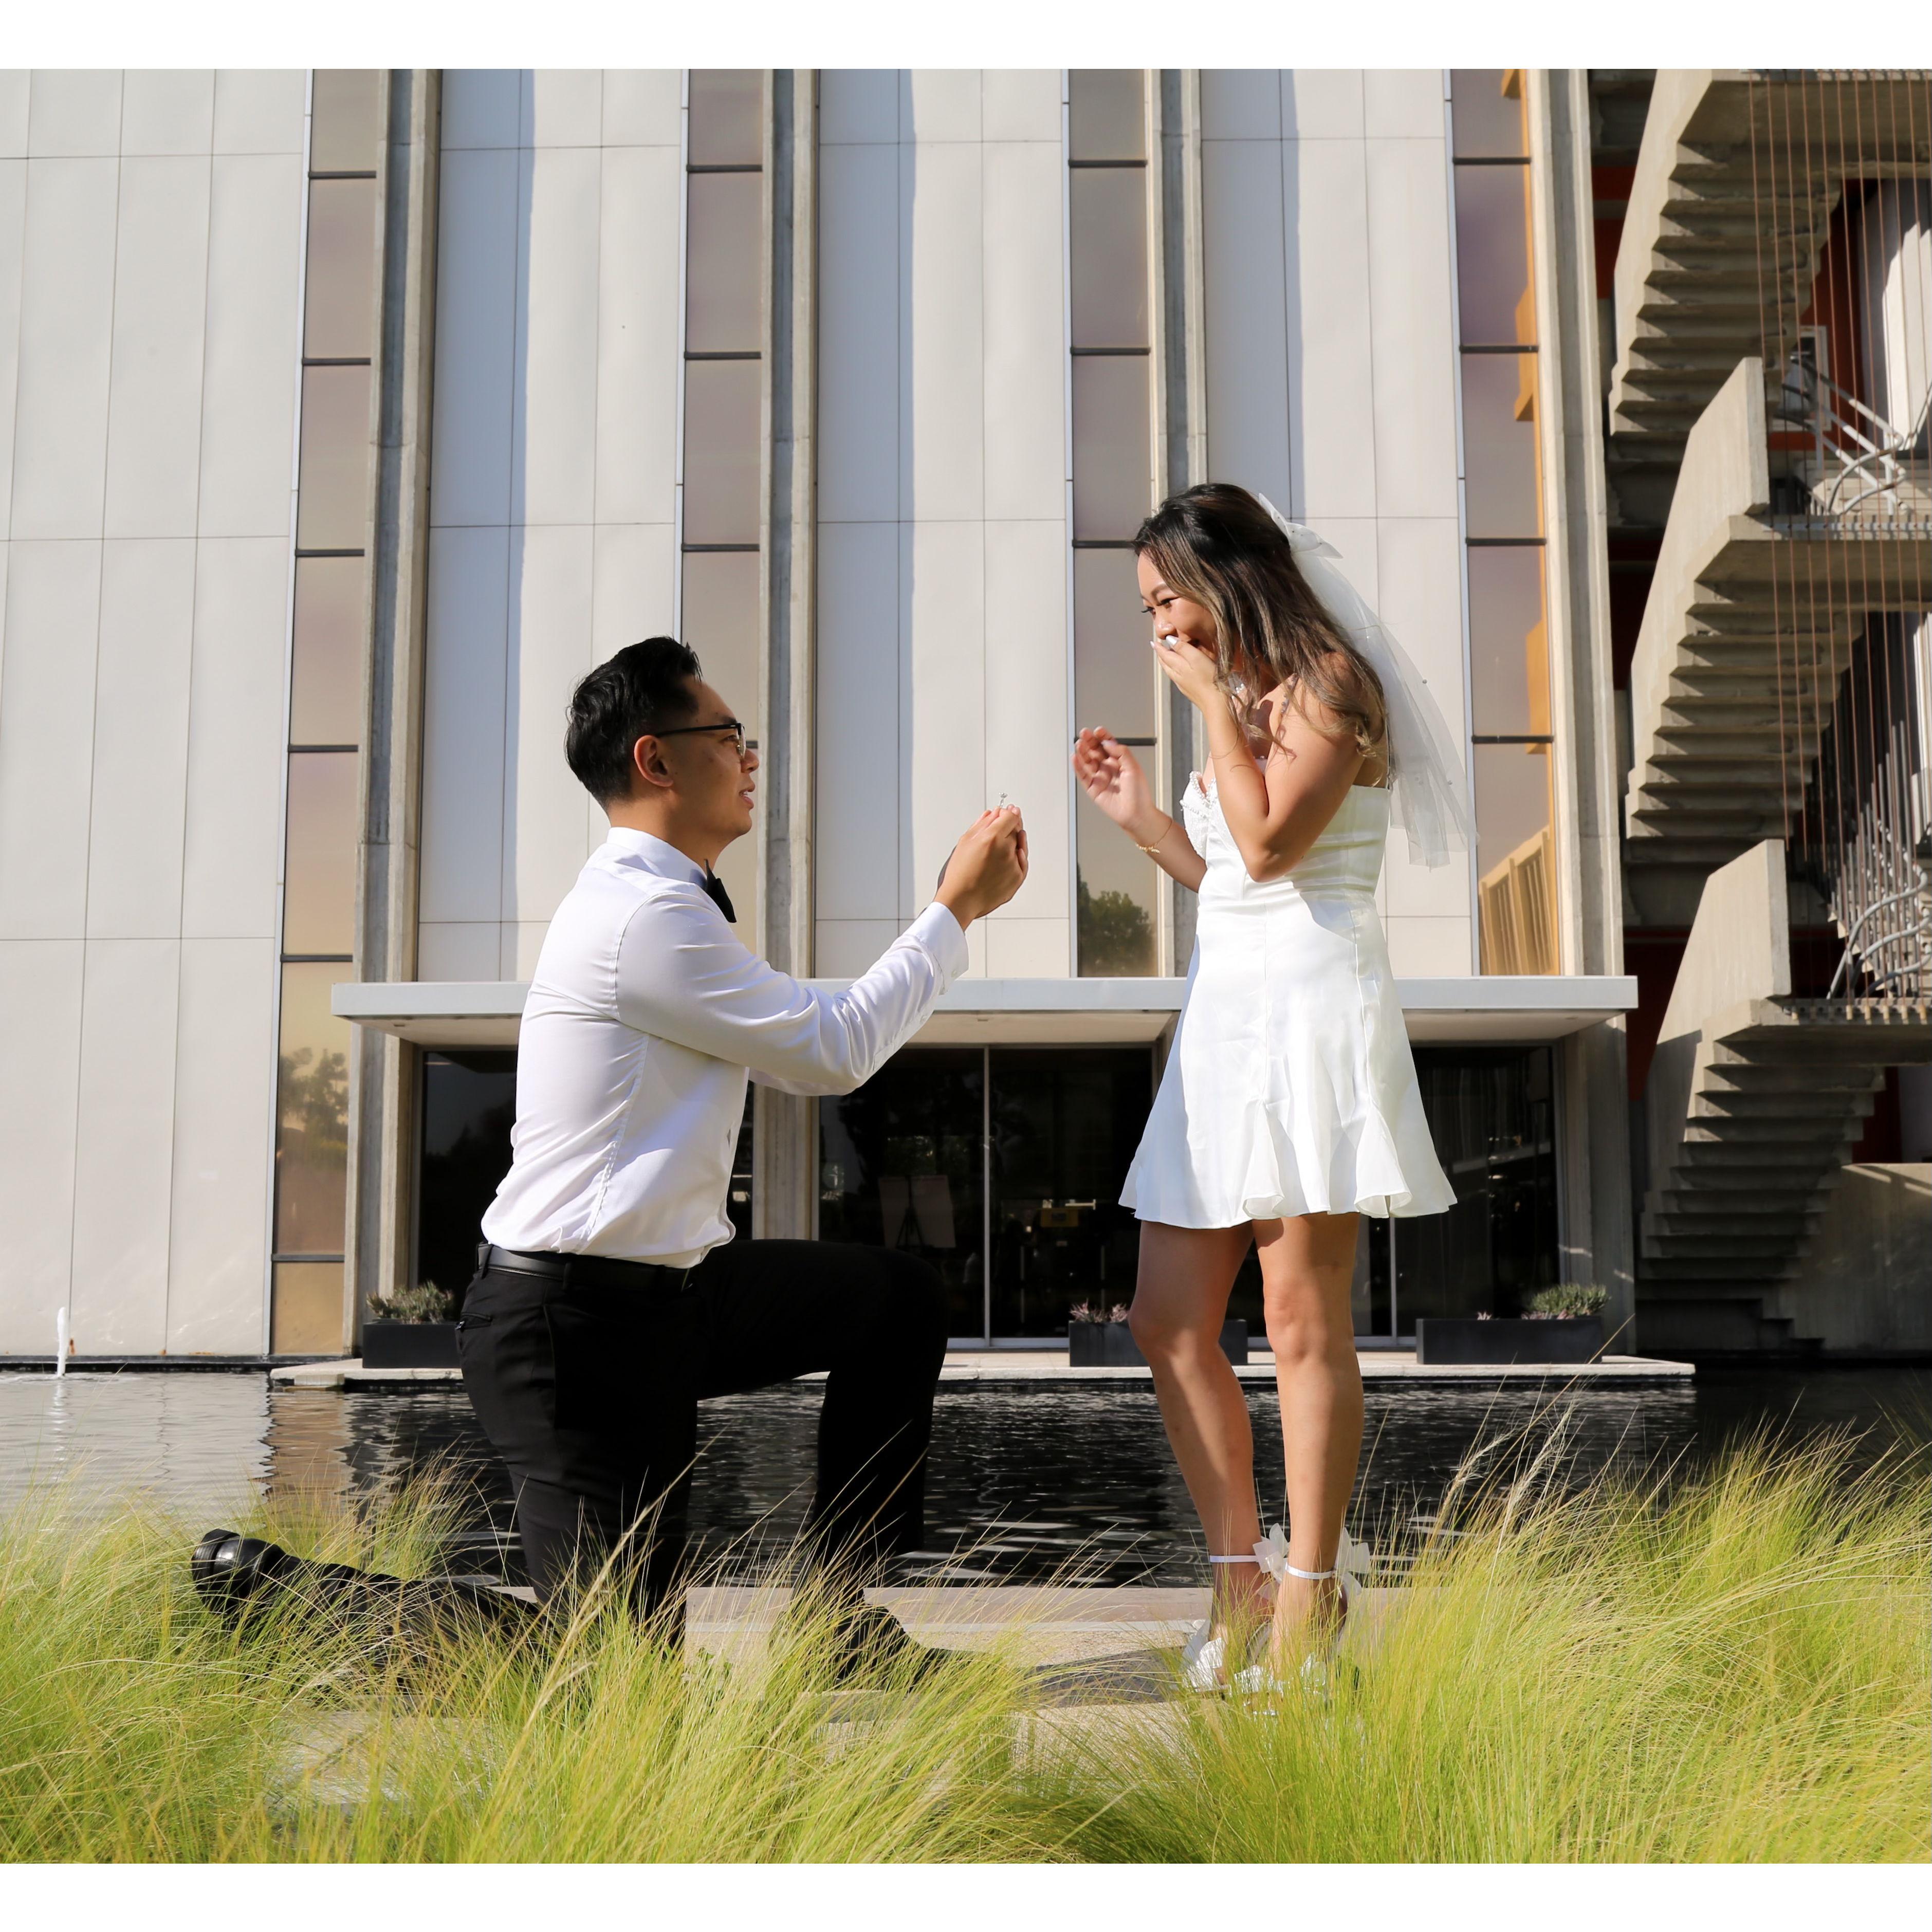 christ cathedral engagement shoot